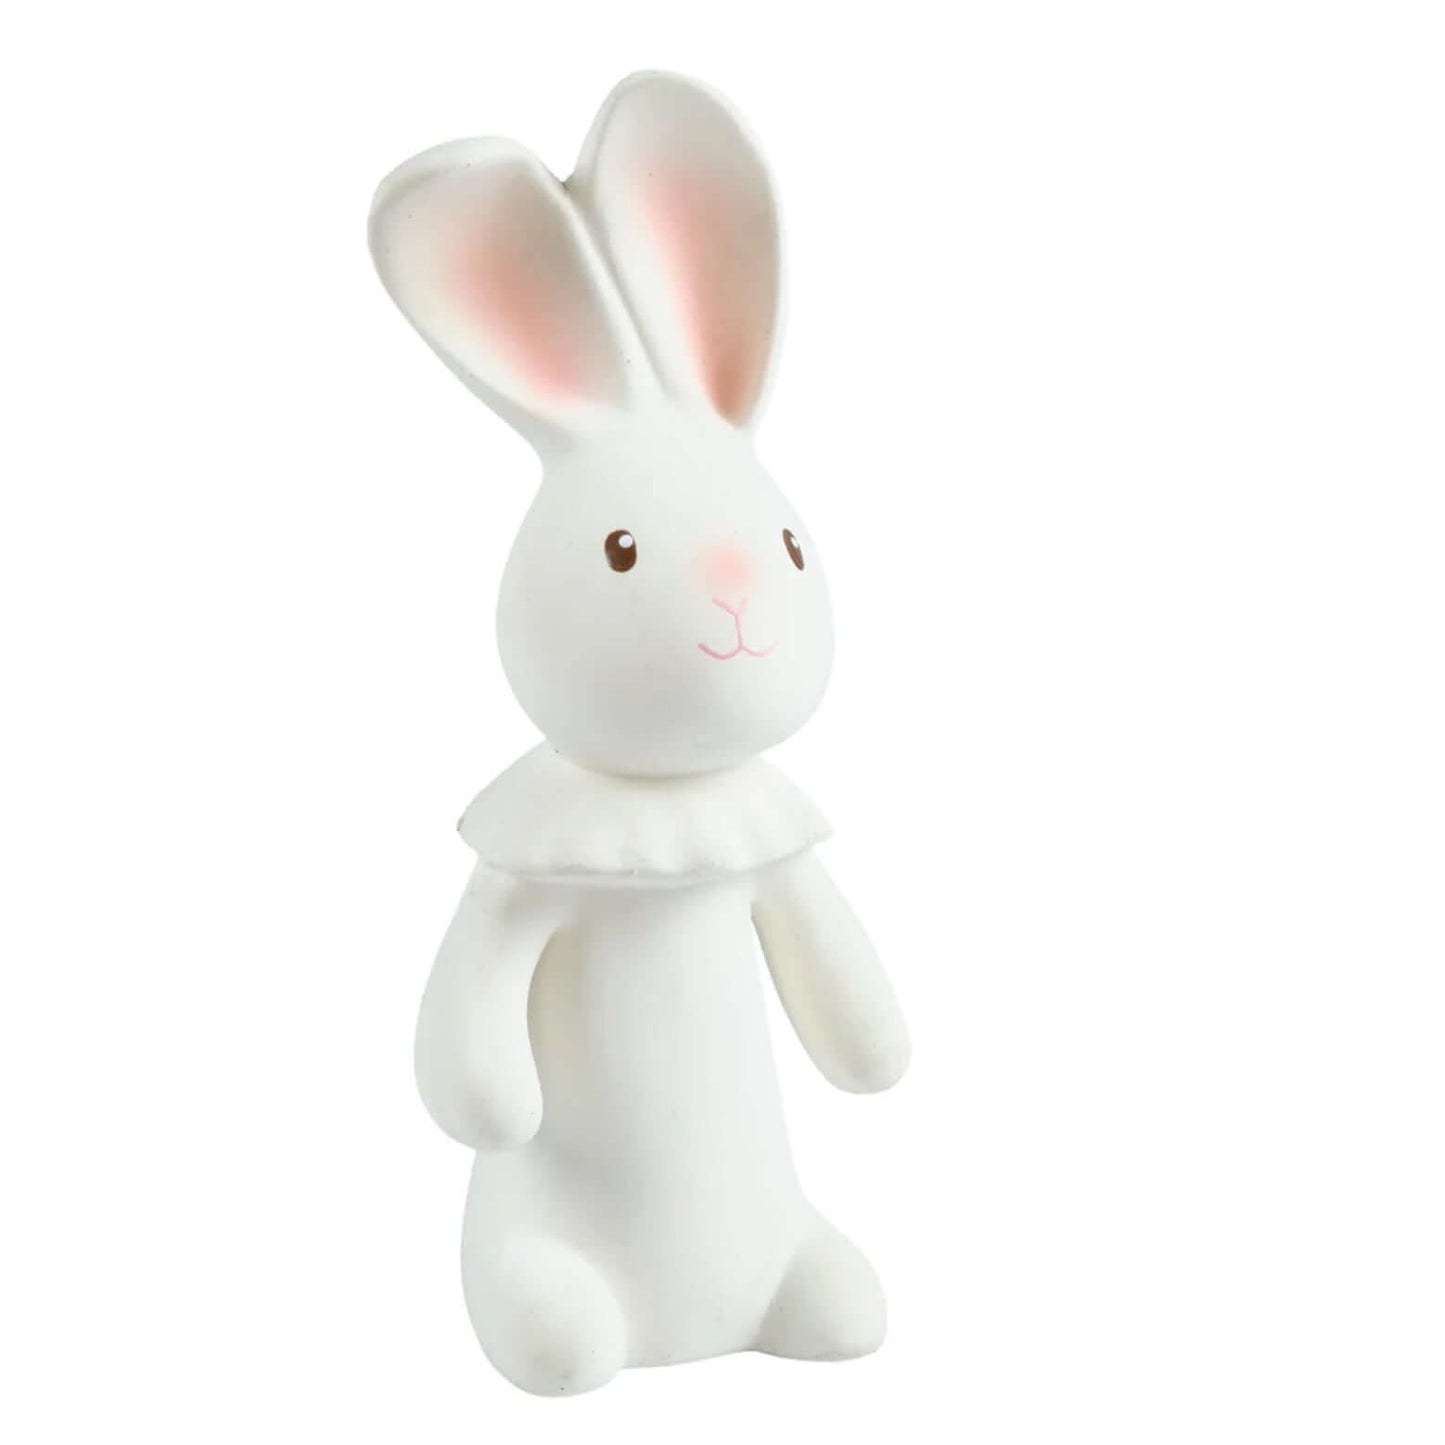 Natural Rubber Havah the Bunny Squeaker Teething Toy